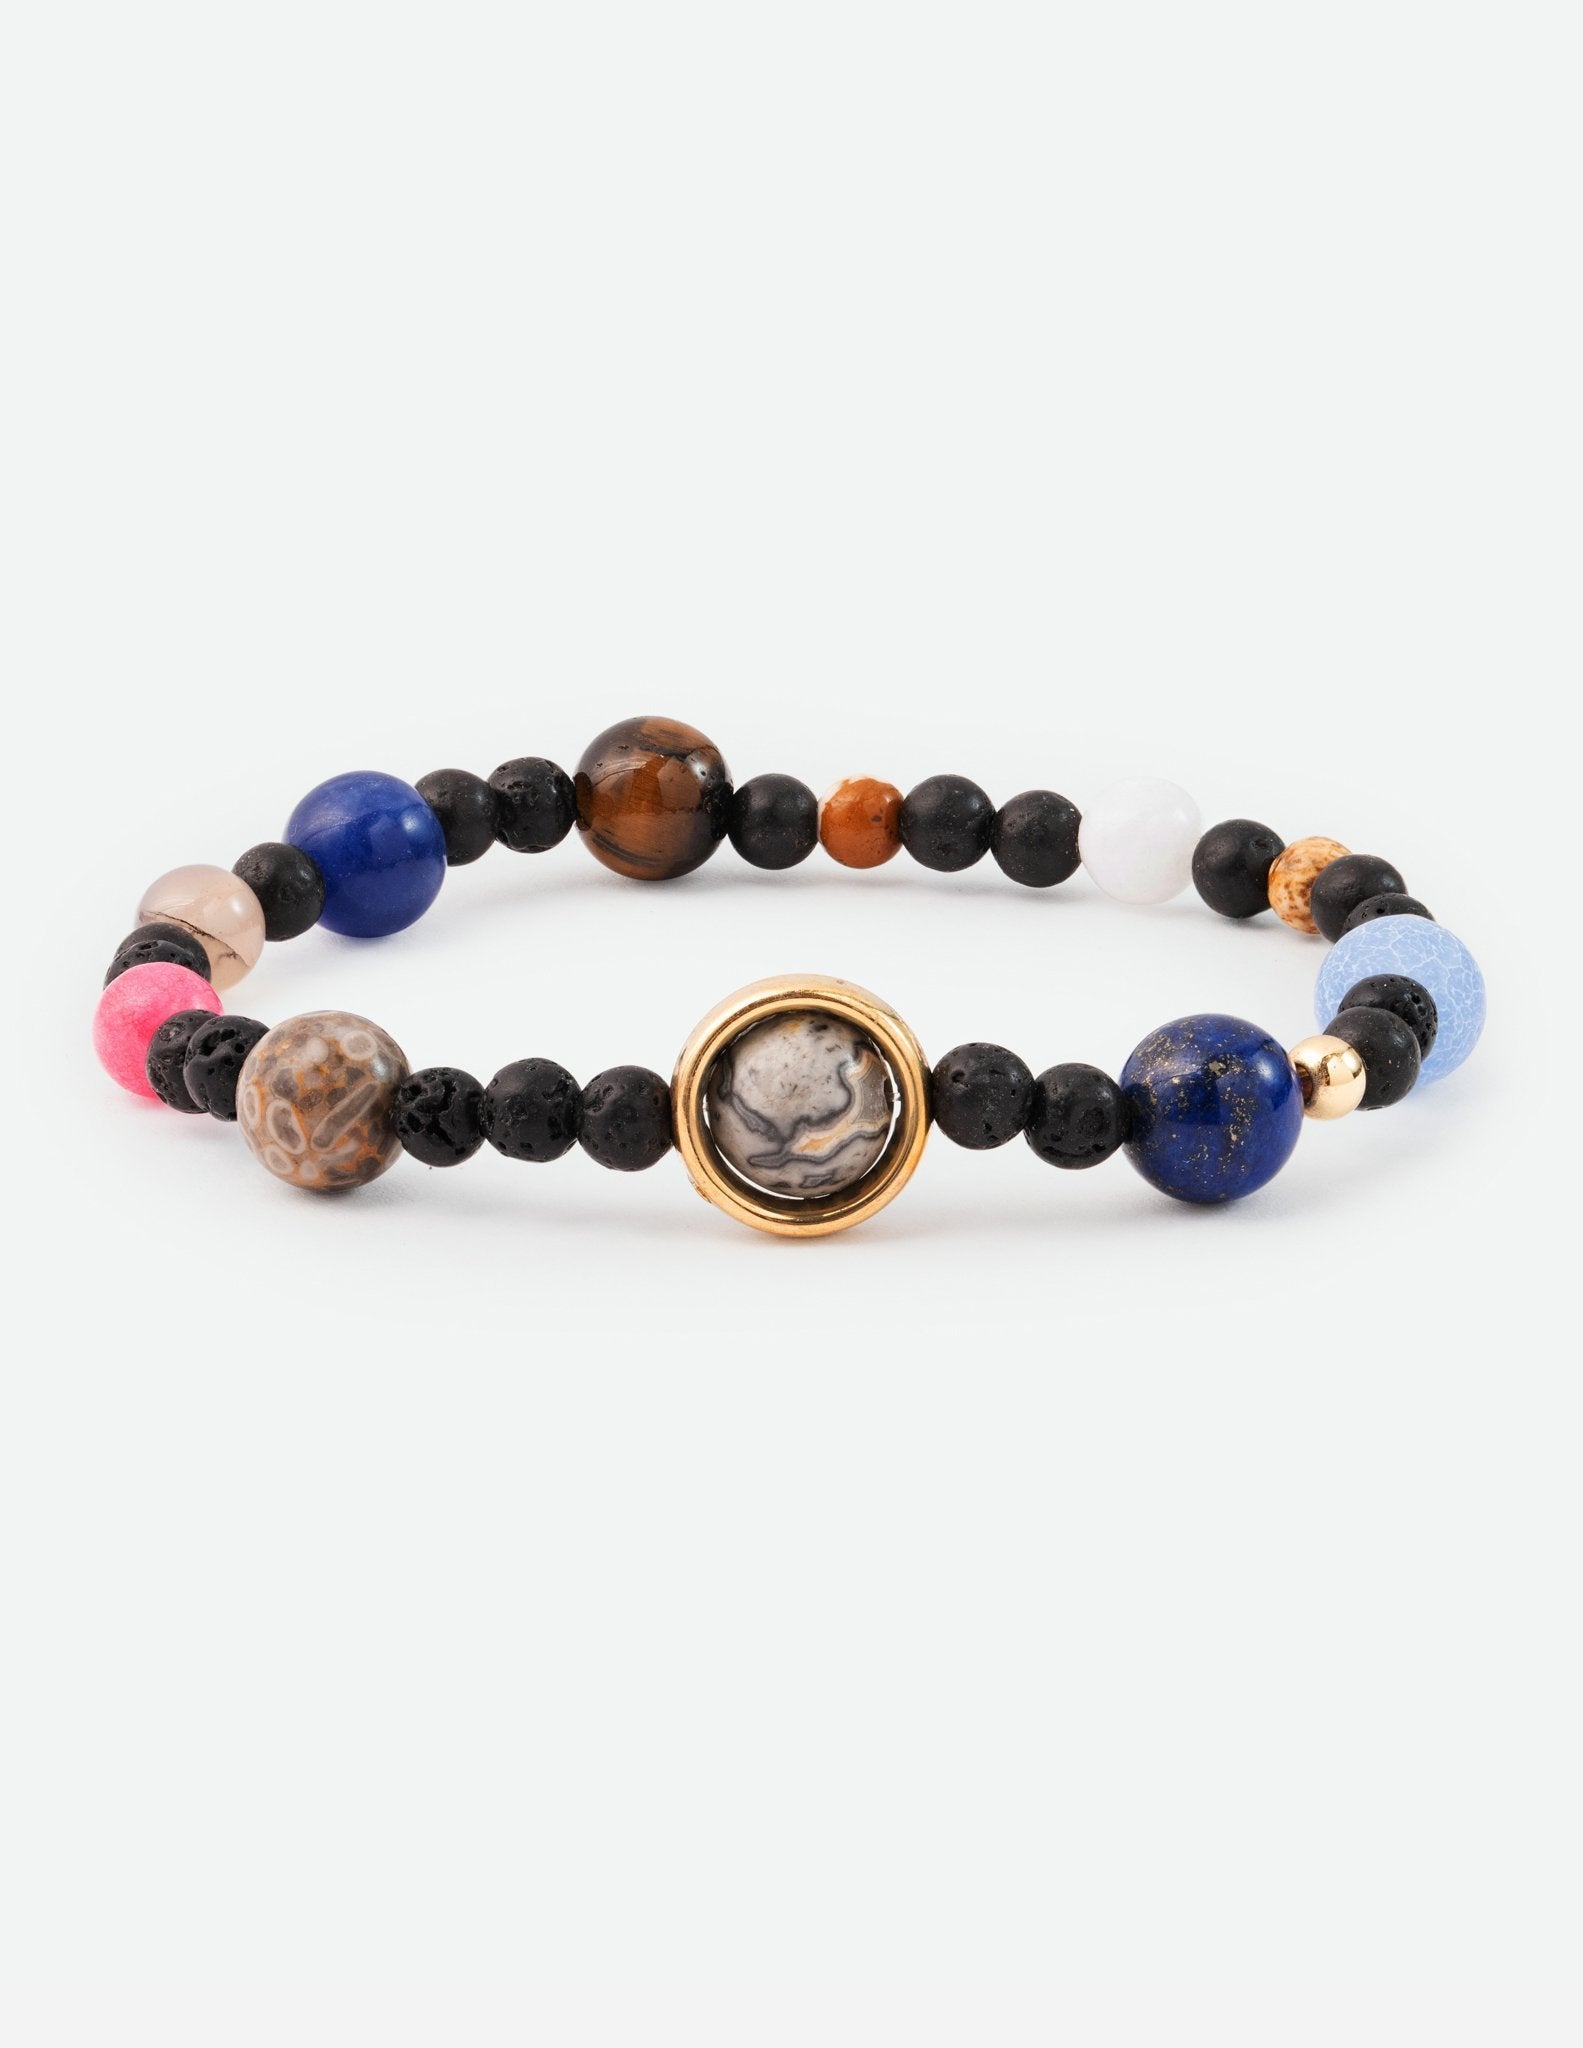 Galaxy Bracelet Featuring Our Solar System in SemiPrecious Stone Bead   Fish Company